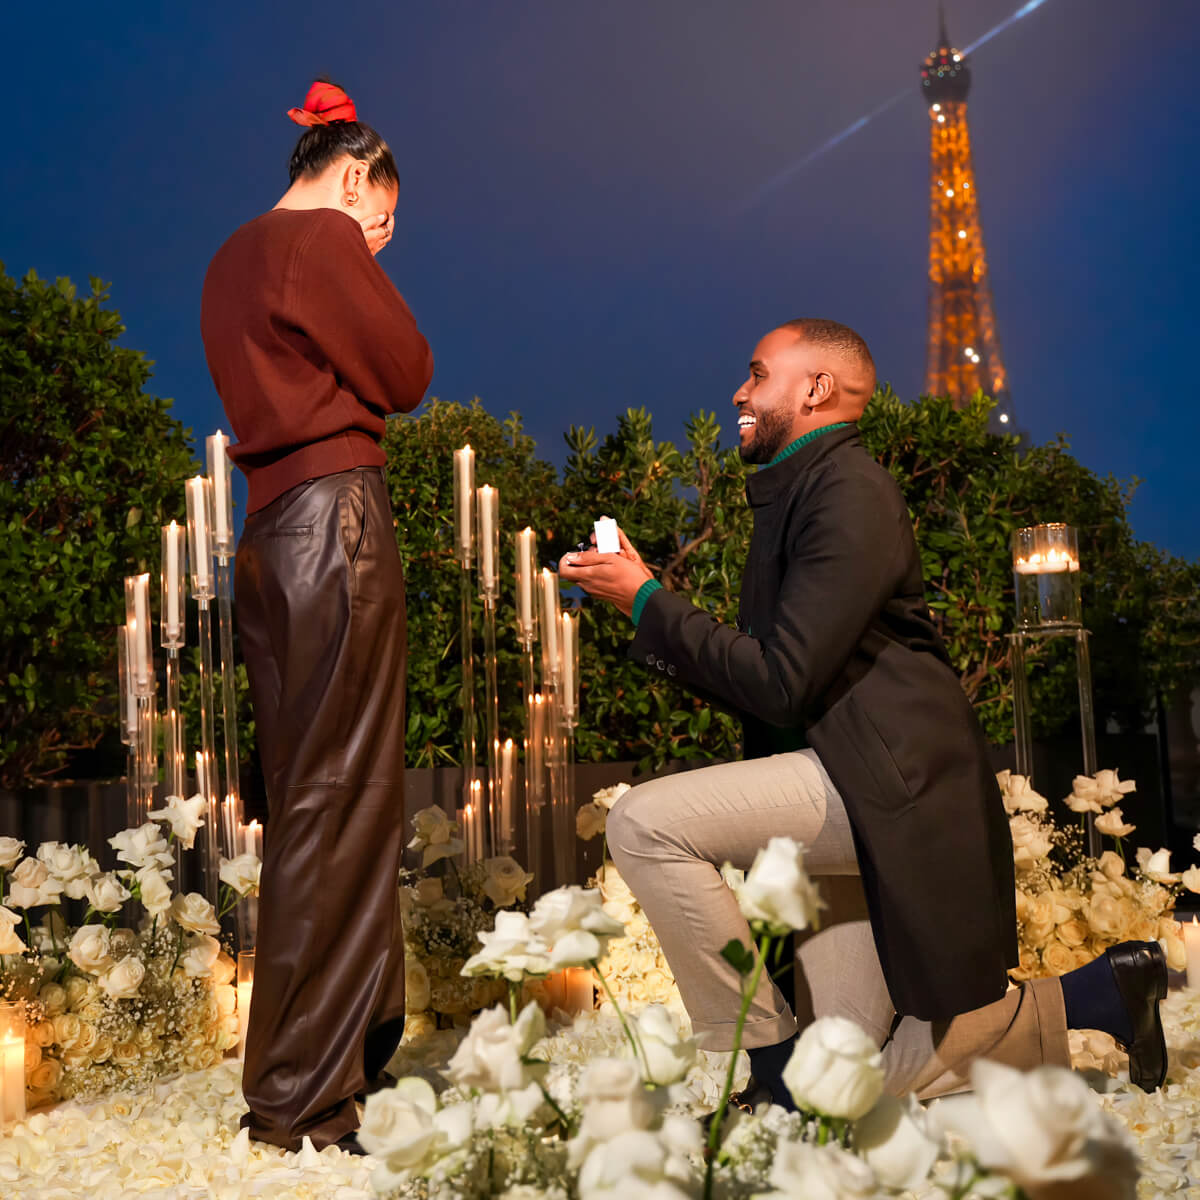 Black couple enjoying a romantic New York City proposal on a private Paris rooftop at night, surrounded by luxury floral arrangements with the Eiffel Tower twinkling in the background, captured by a professional New York City proposal photographer.